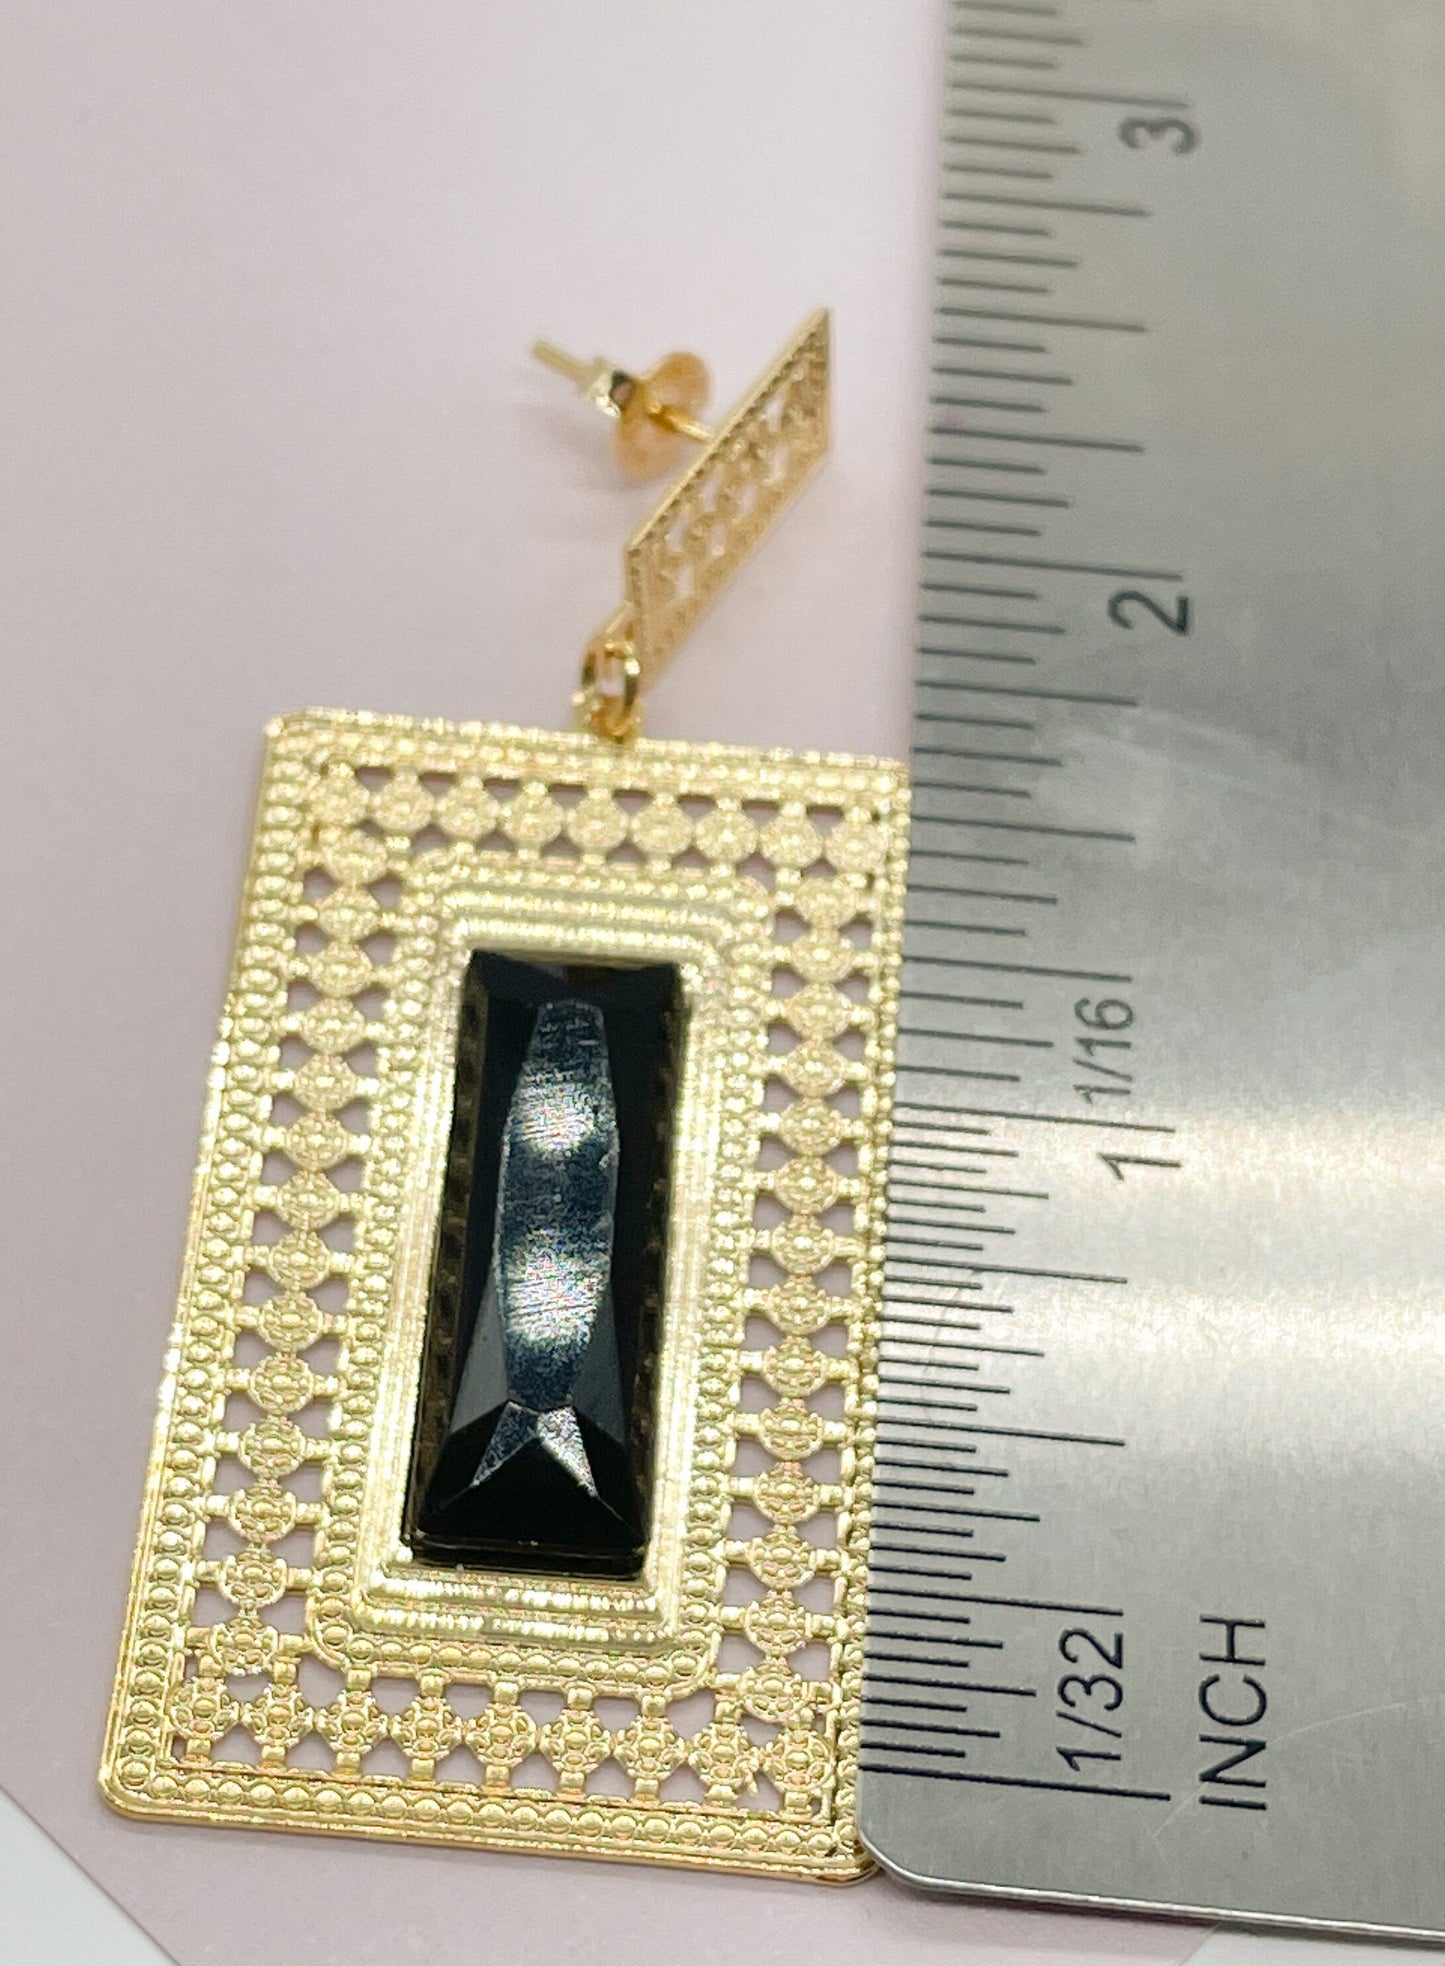 18k Gold Layered Square Dangling Earrings, Geometric, Featuring Micro Pave